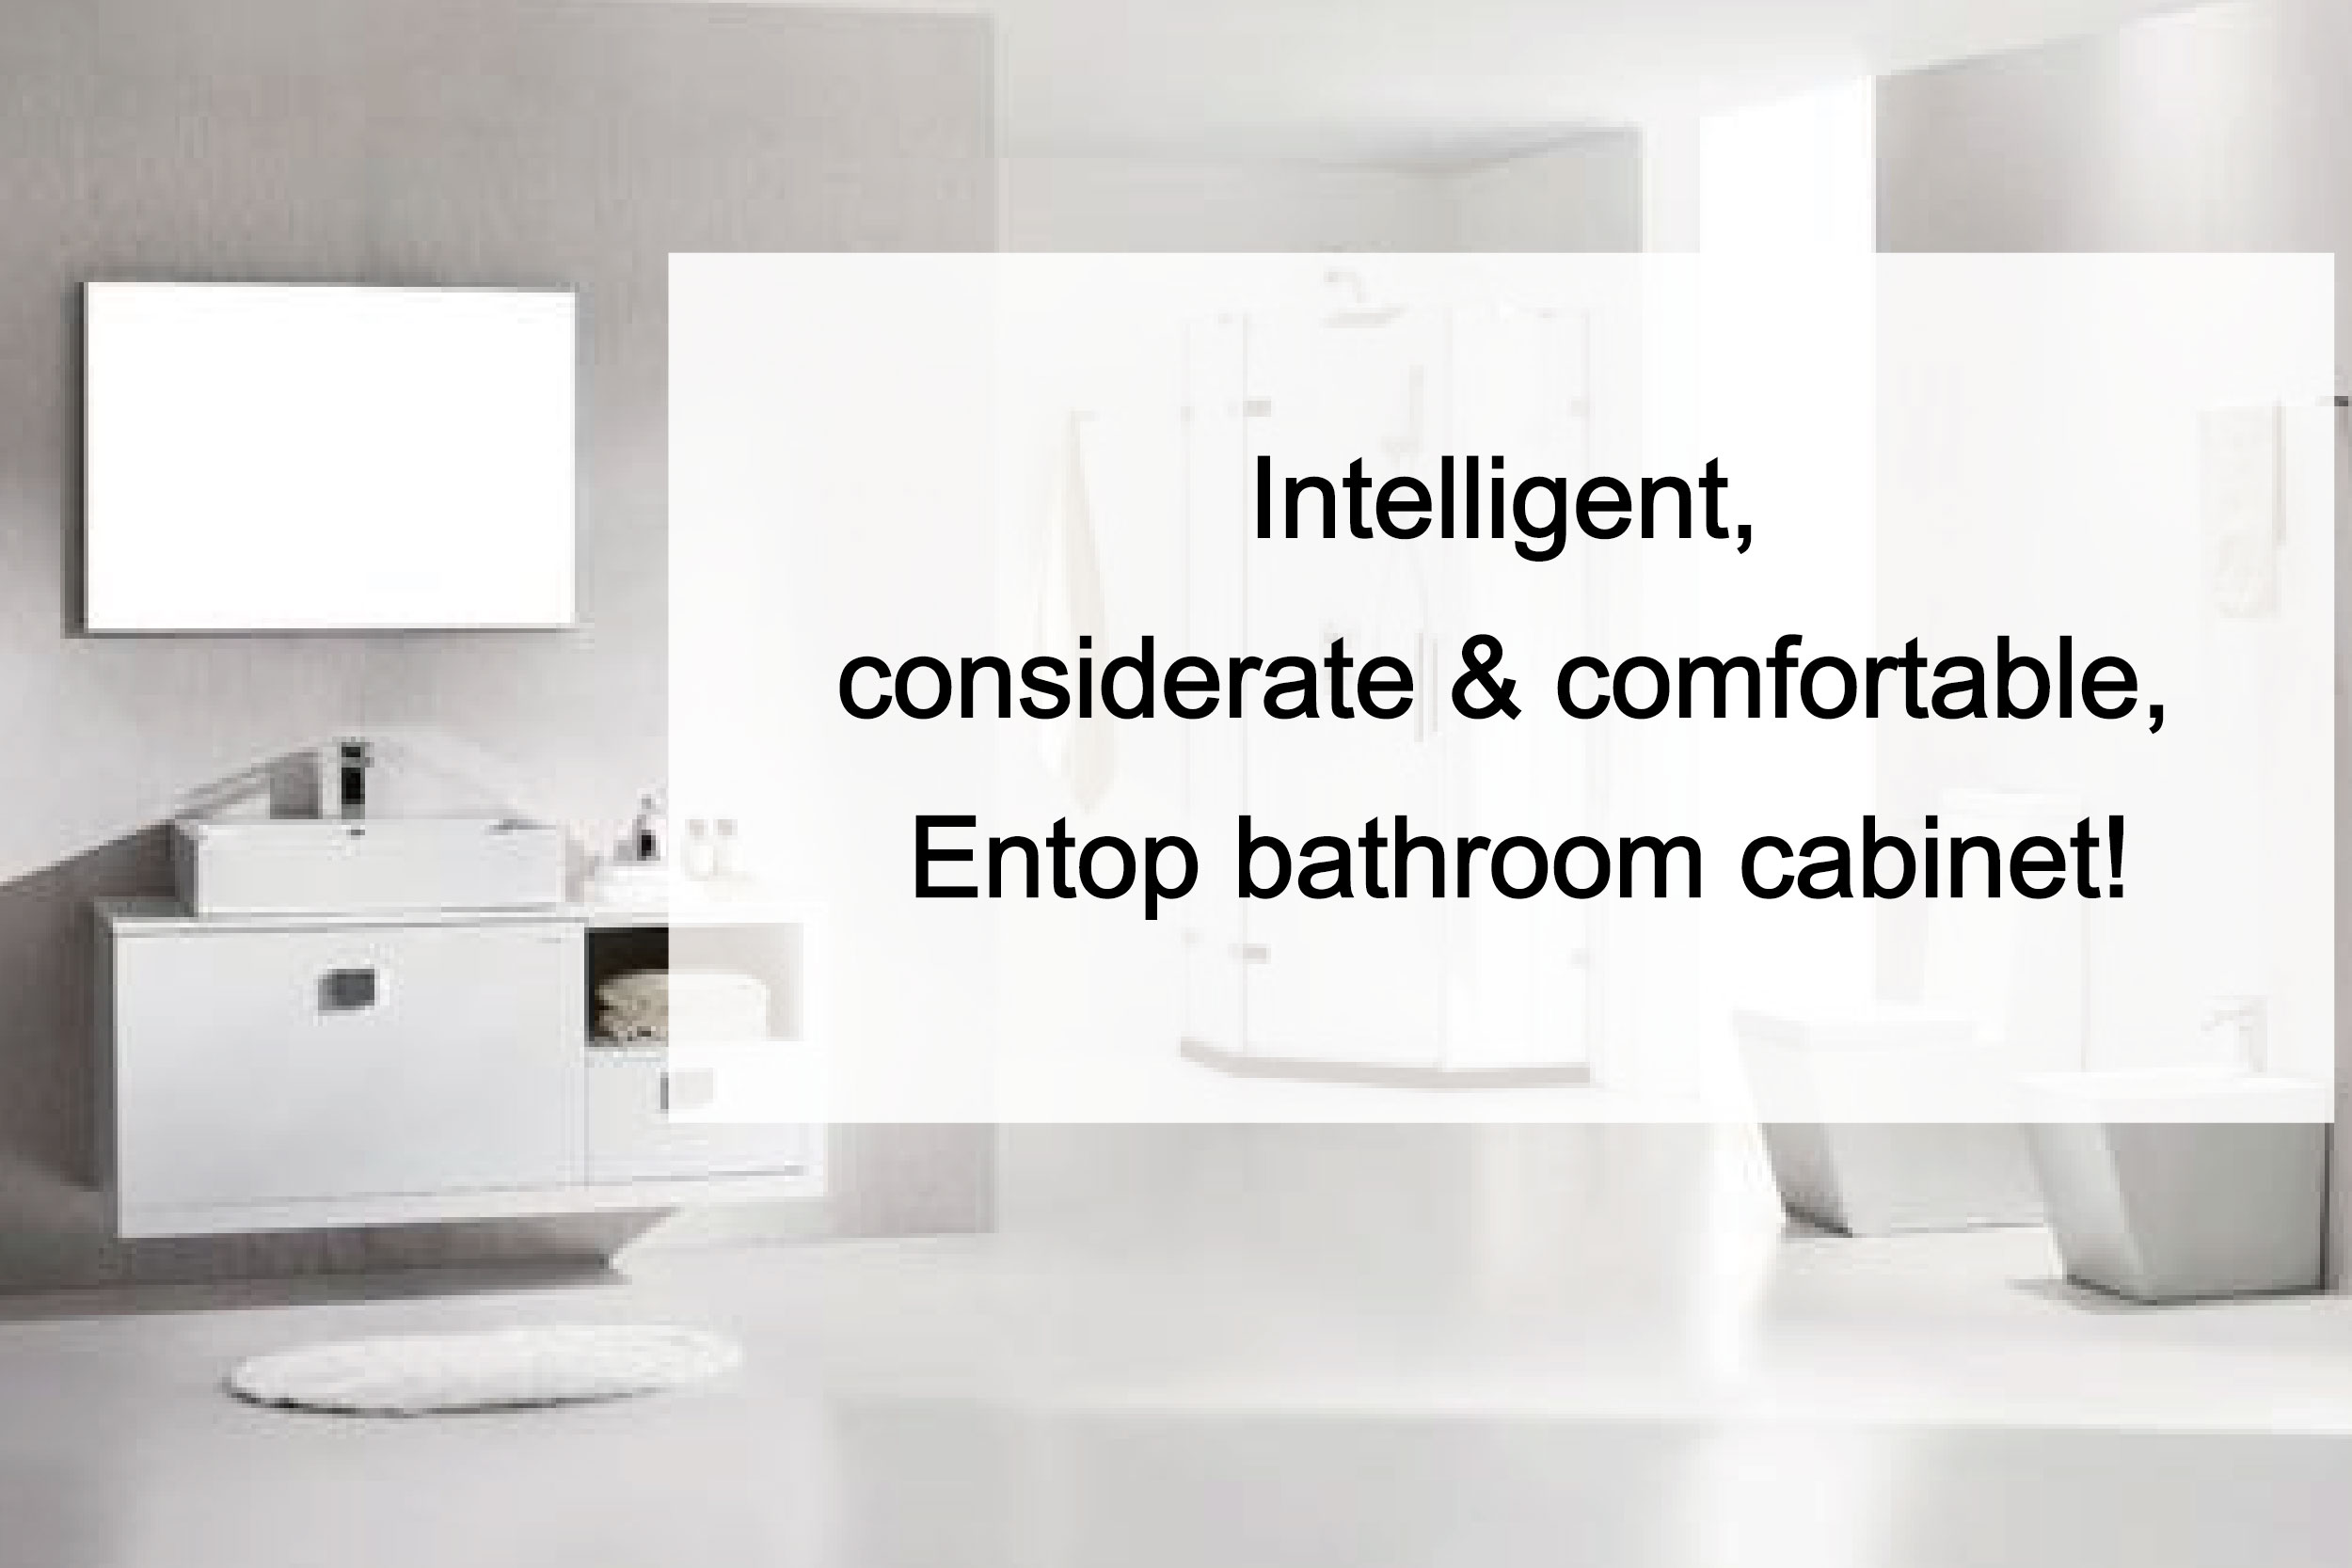 Intelligent, considerate and comfortable, Entop bathroom cabinet!